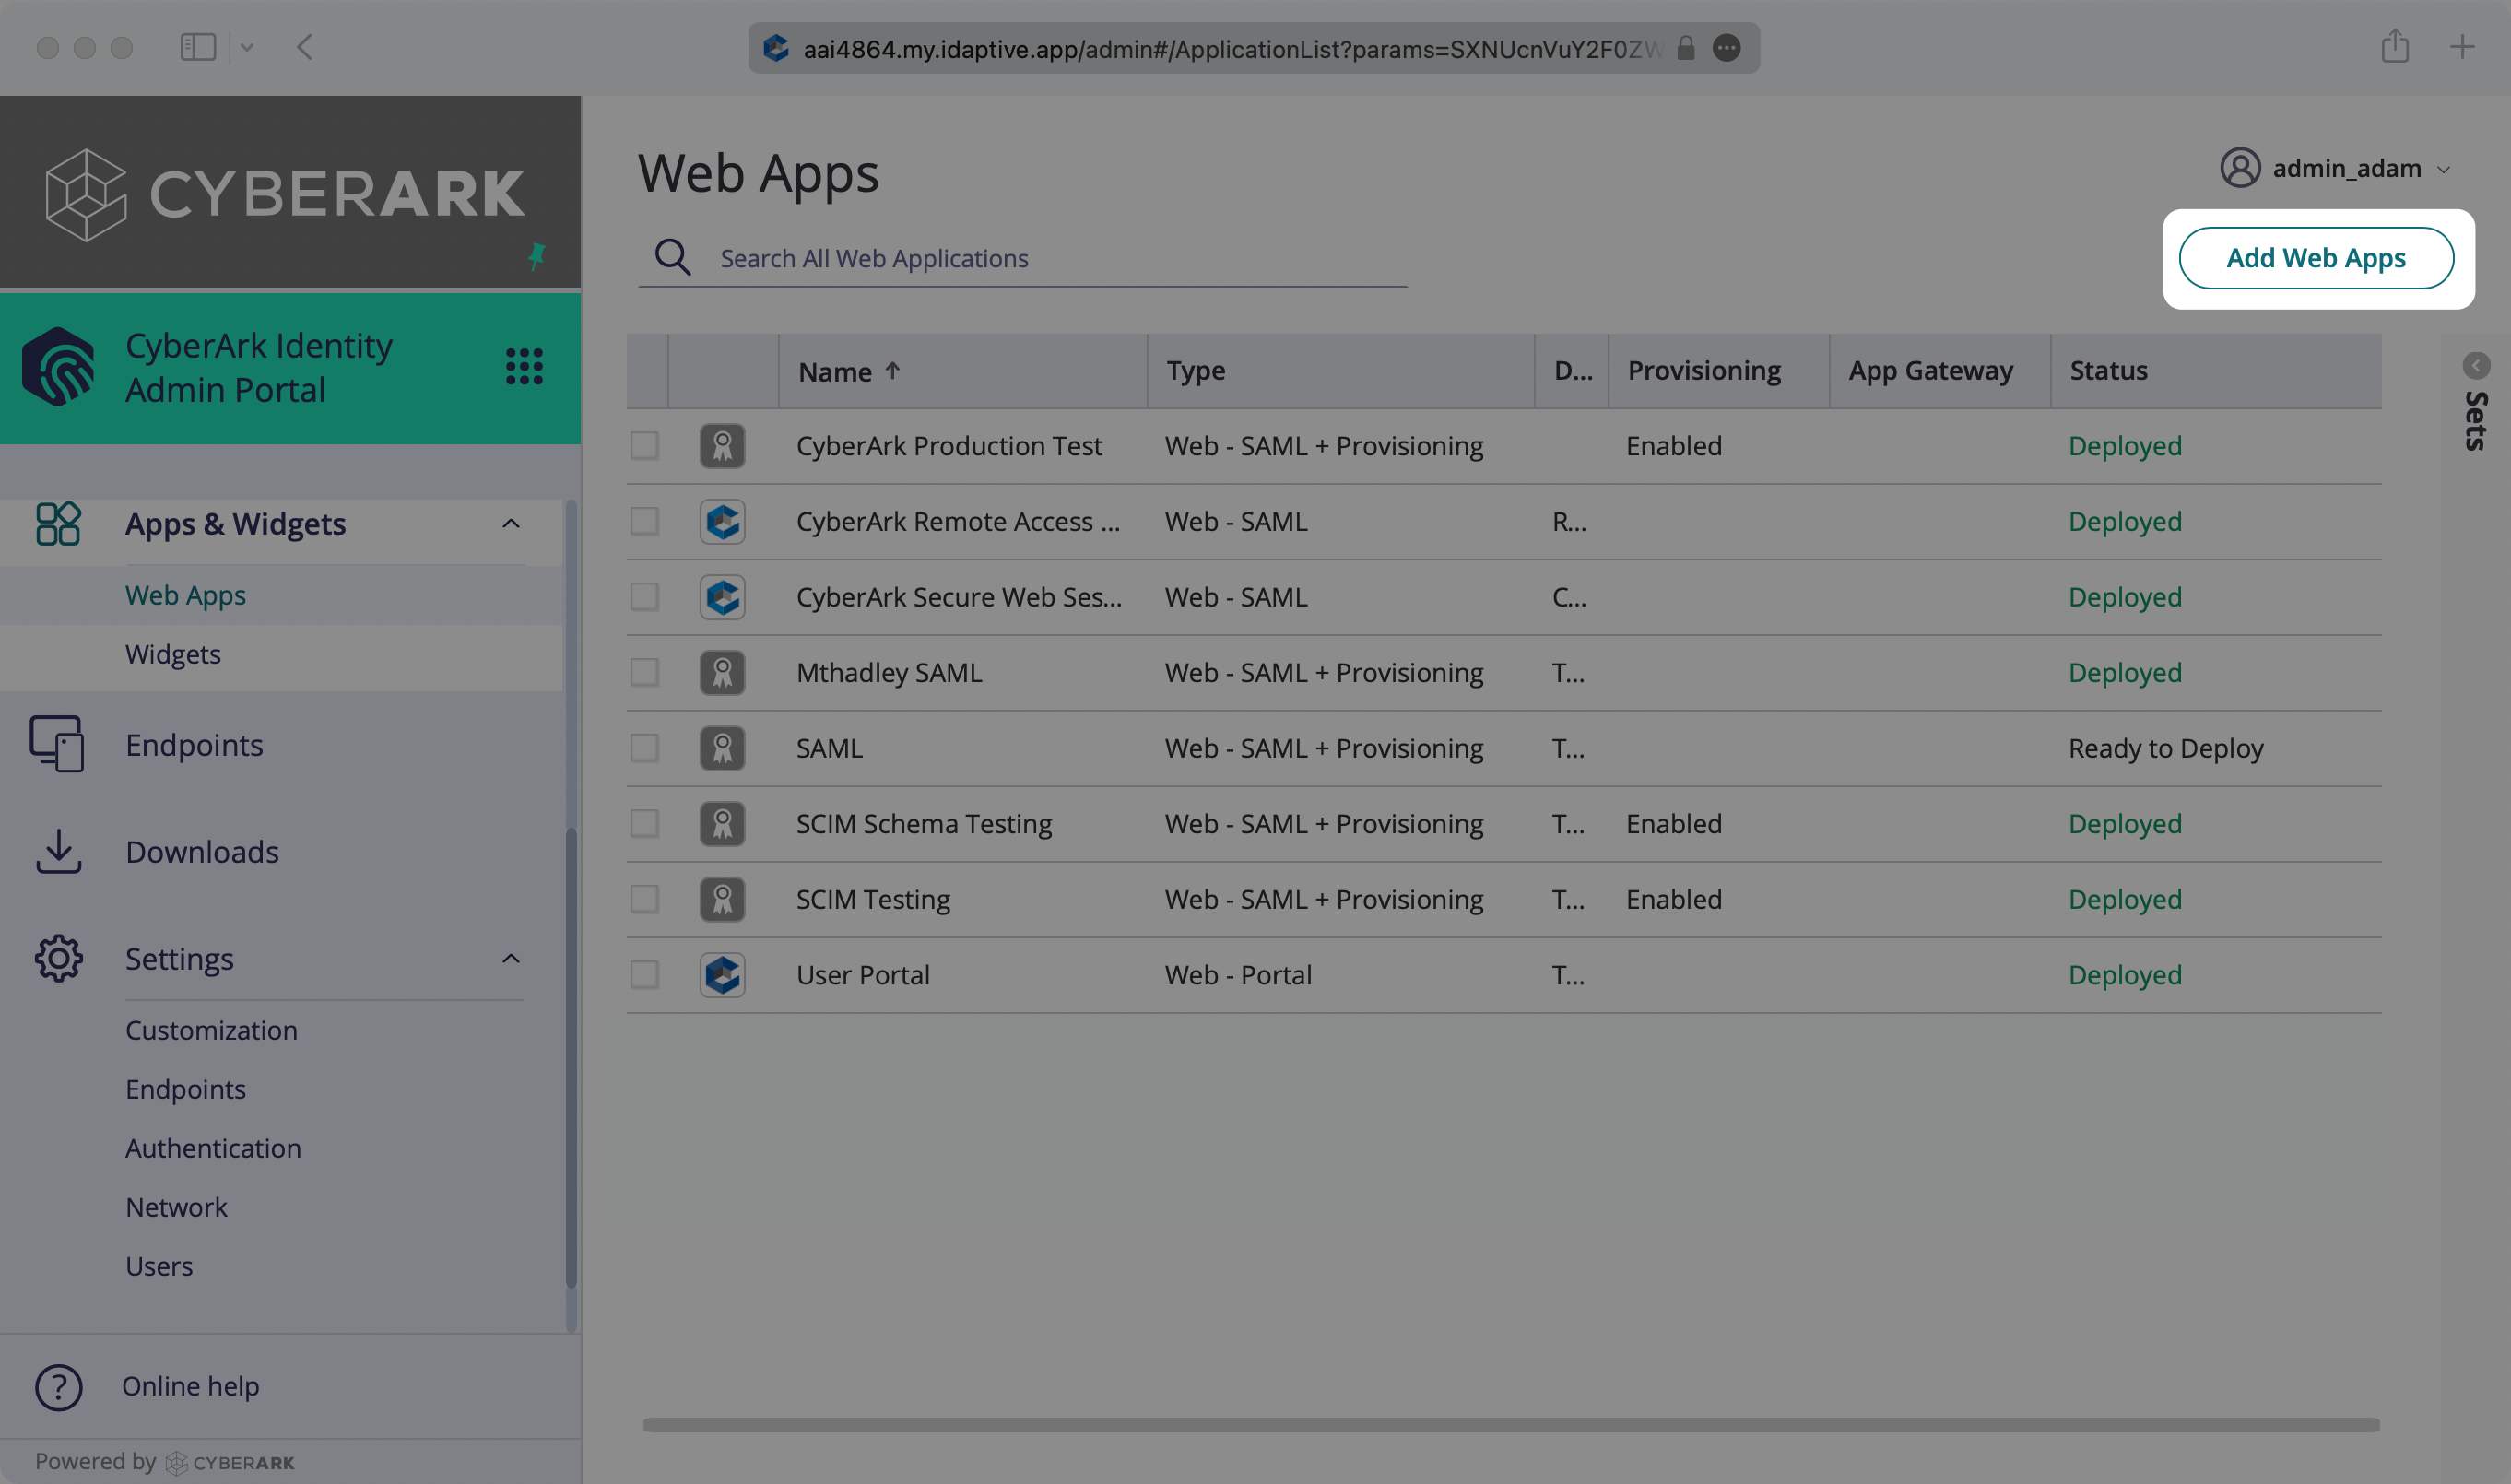 A screenshot showing where to select "Add Web Apps" in the CyberArk dashboard.